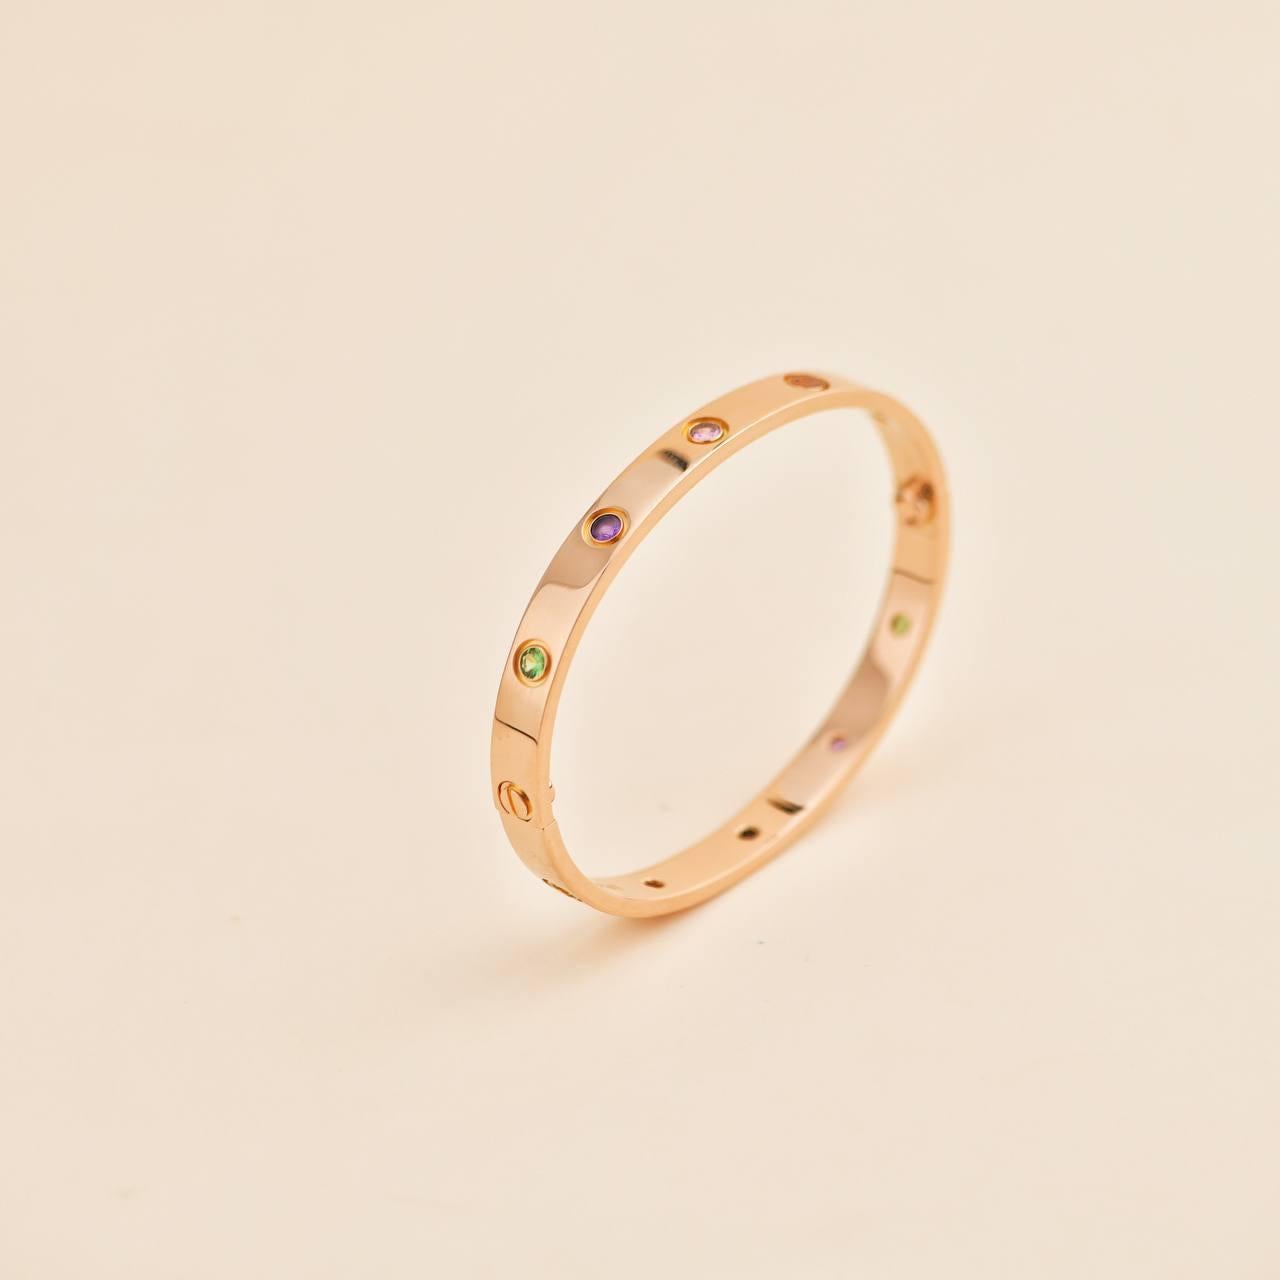 Cartier Love Bracelet 10 Multi Gemstone Rose Gold Size 17 In Excellent Condition For Sale In Banbury, GB